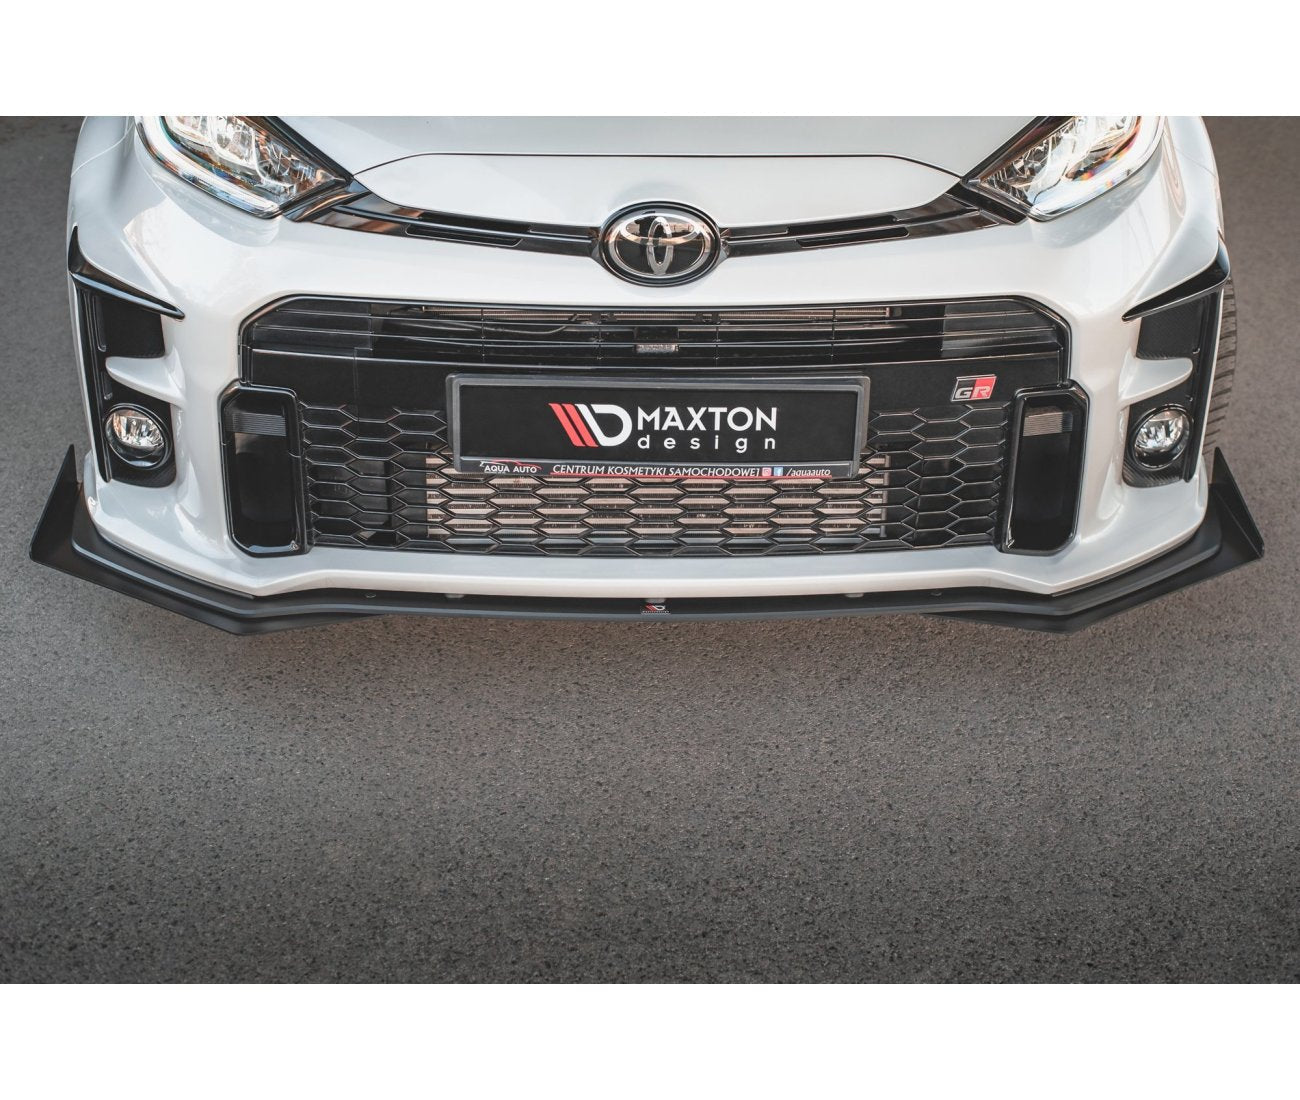 Front flaps for Toyota GR Yaris 